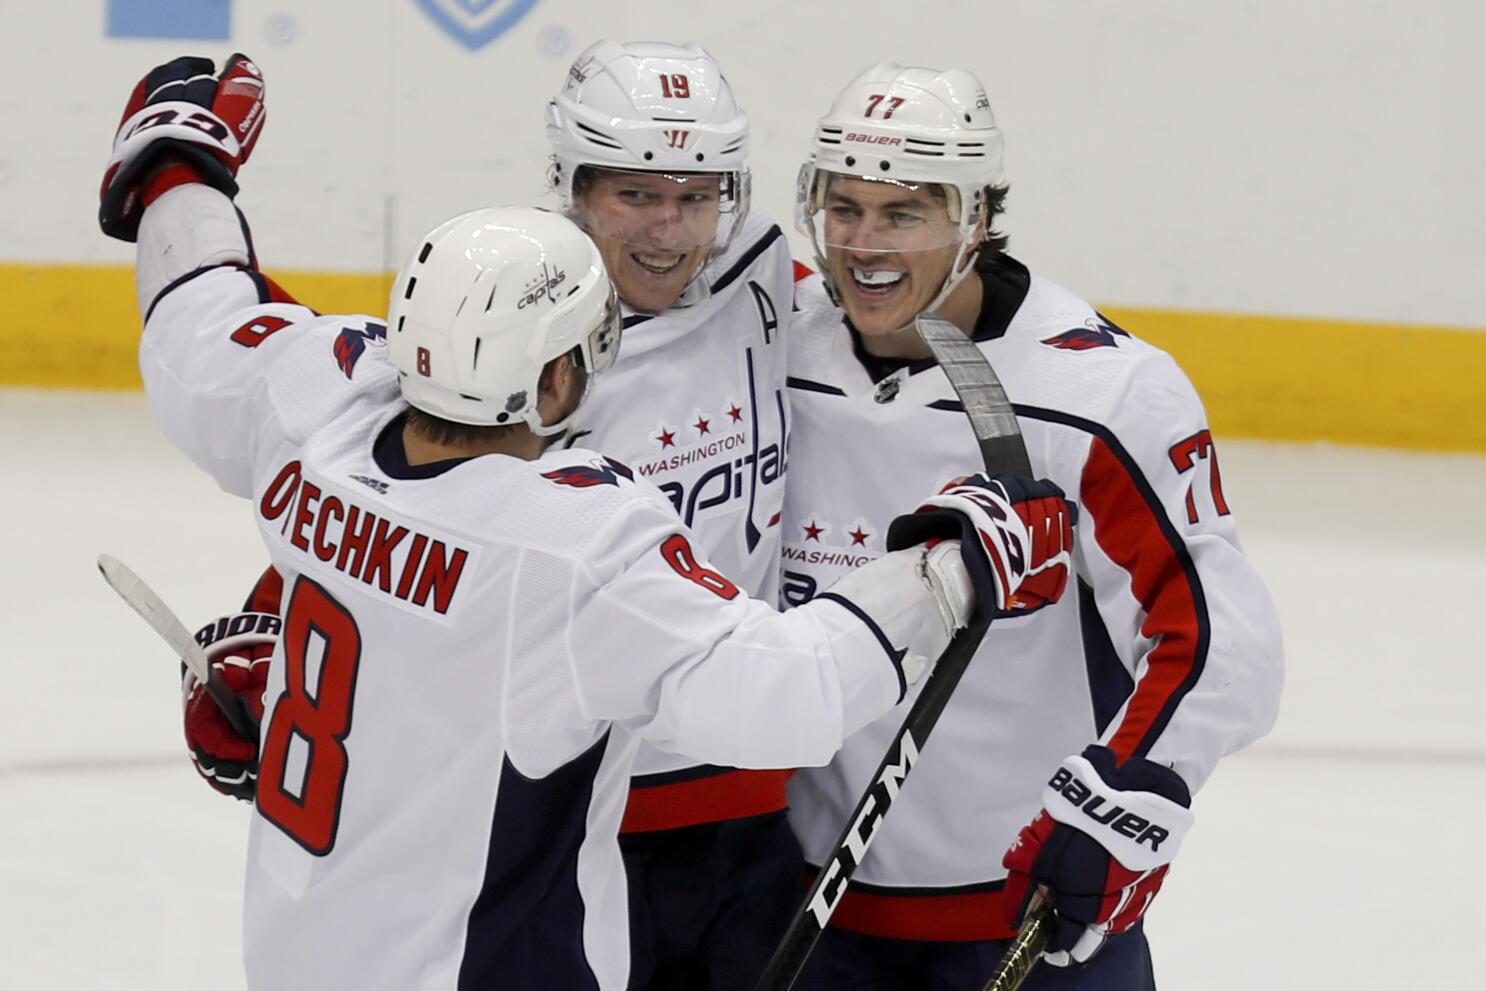 A very good photo of TJ Oshie and Braden Holtby